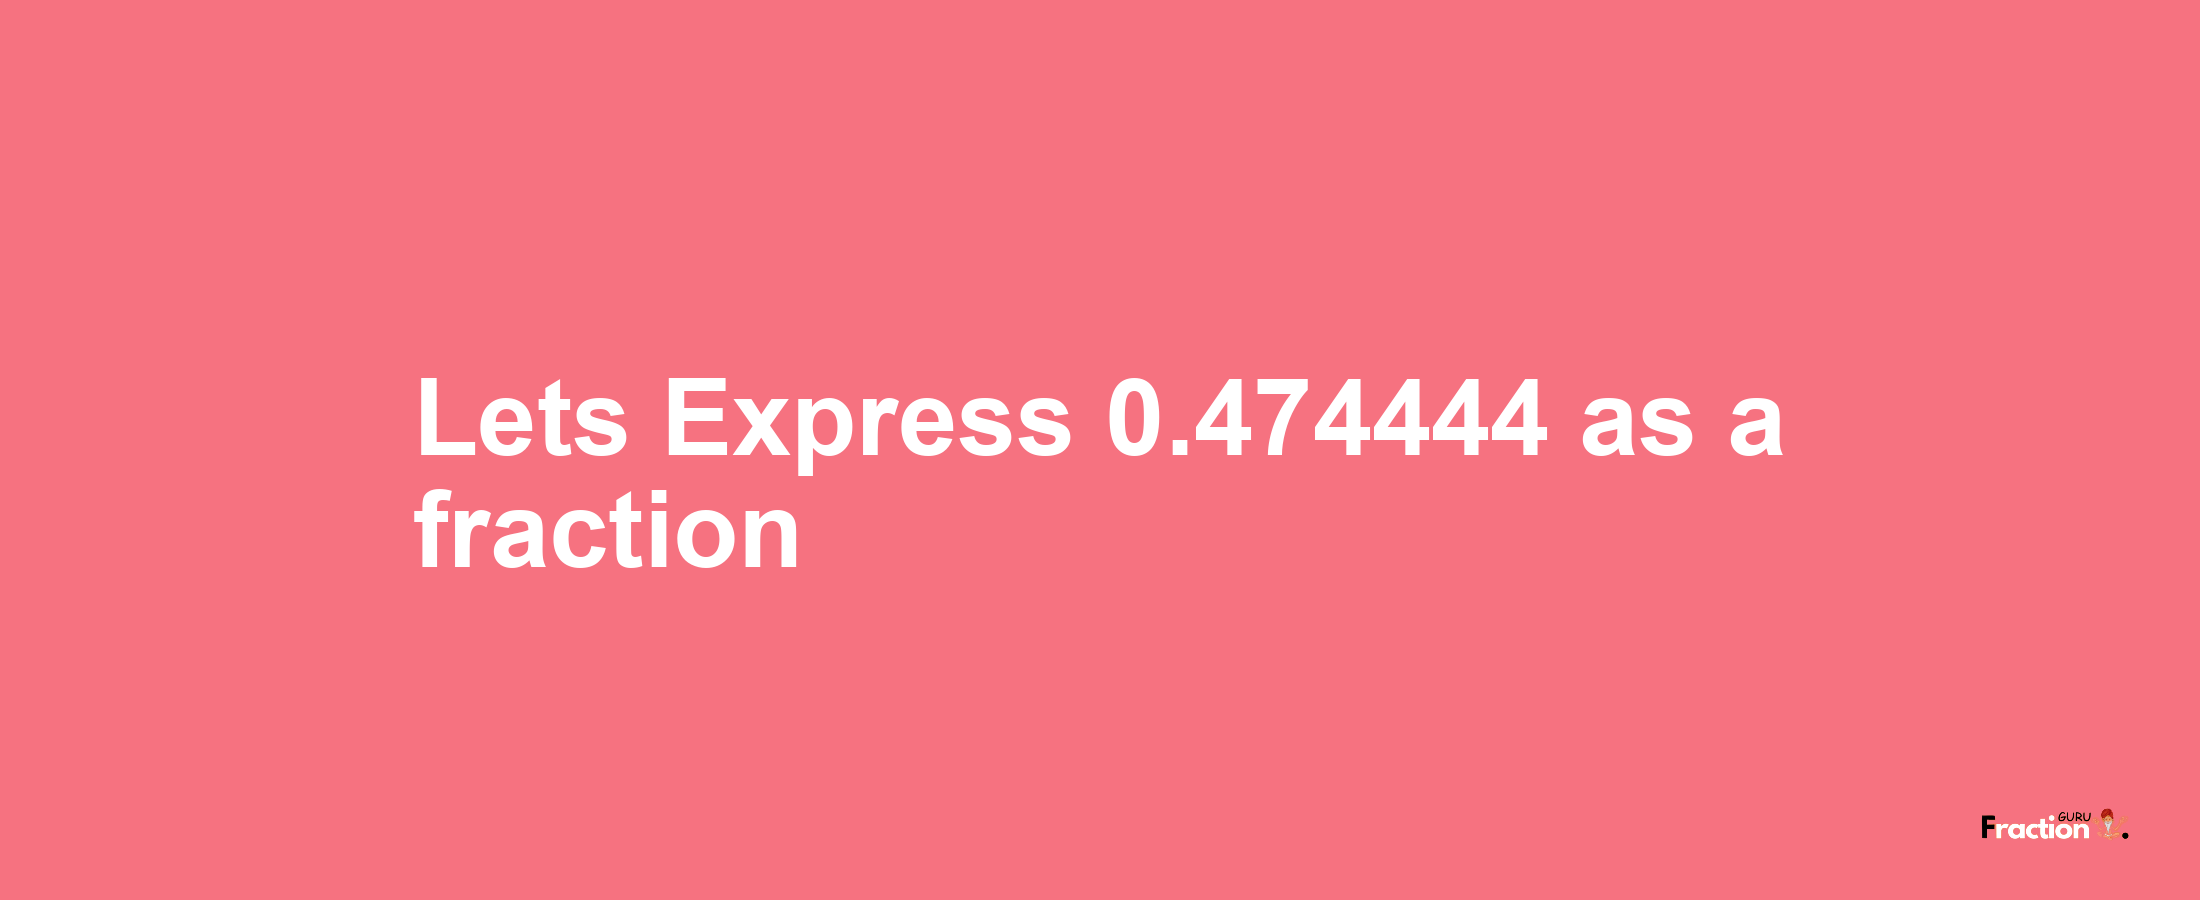 Lets Express 0.474444 as afraction